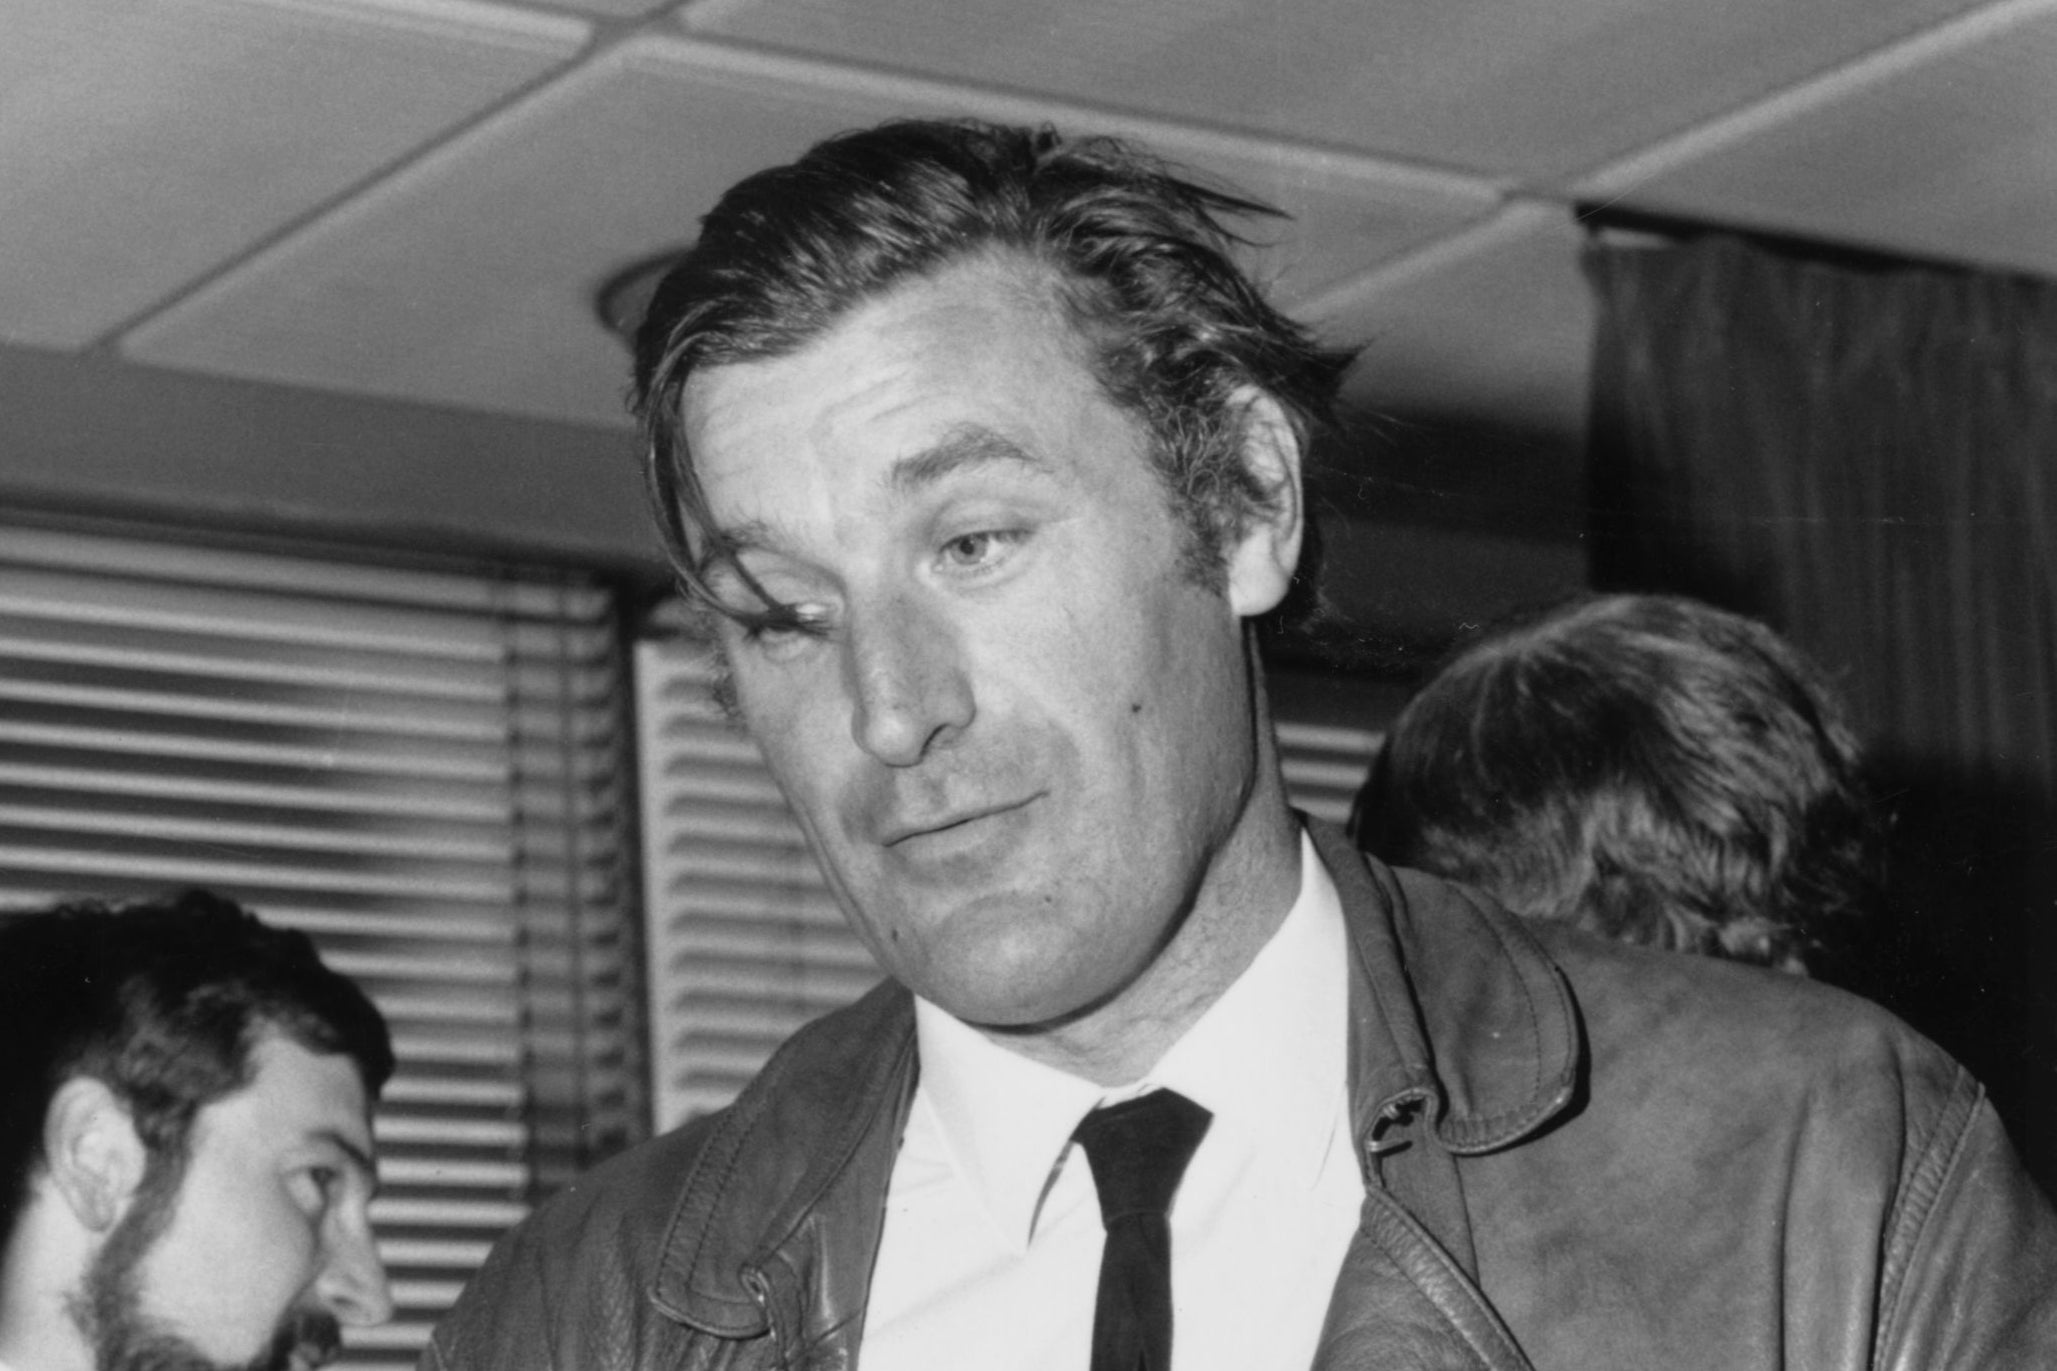 Ted Hughes photographed at a party in 1970